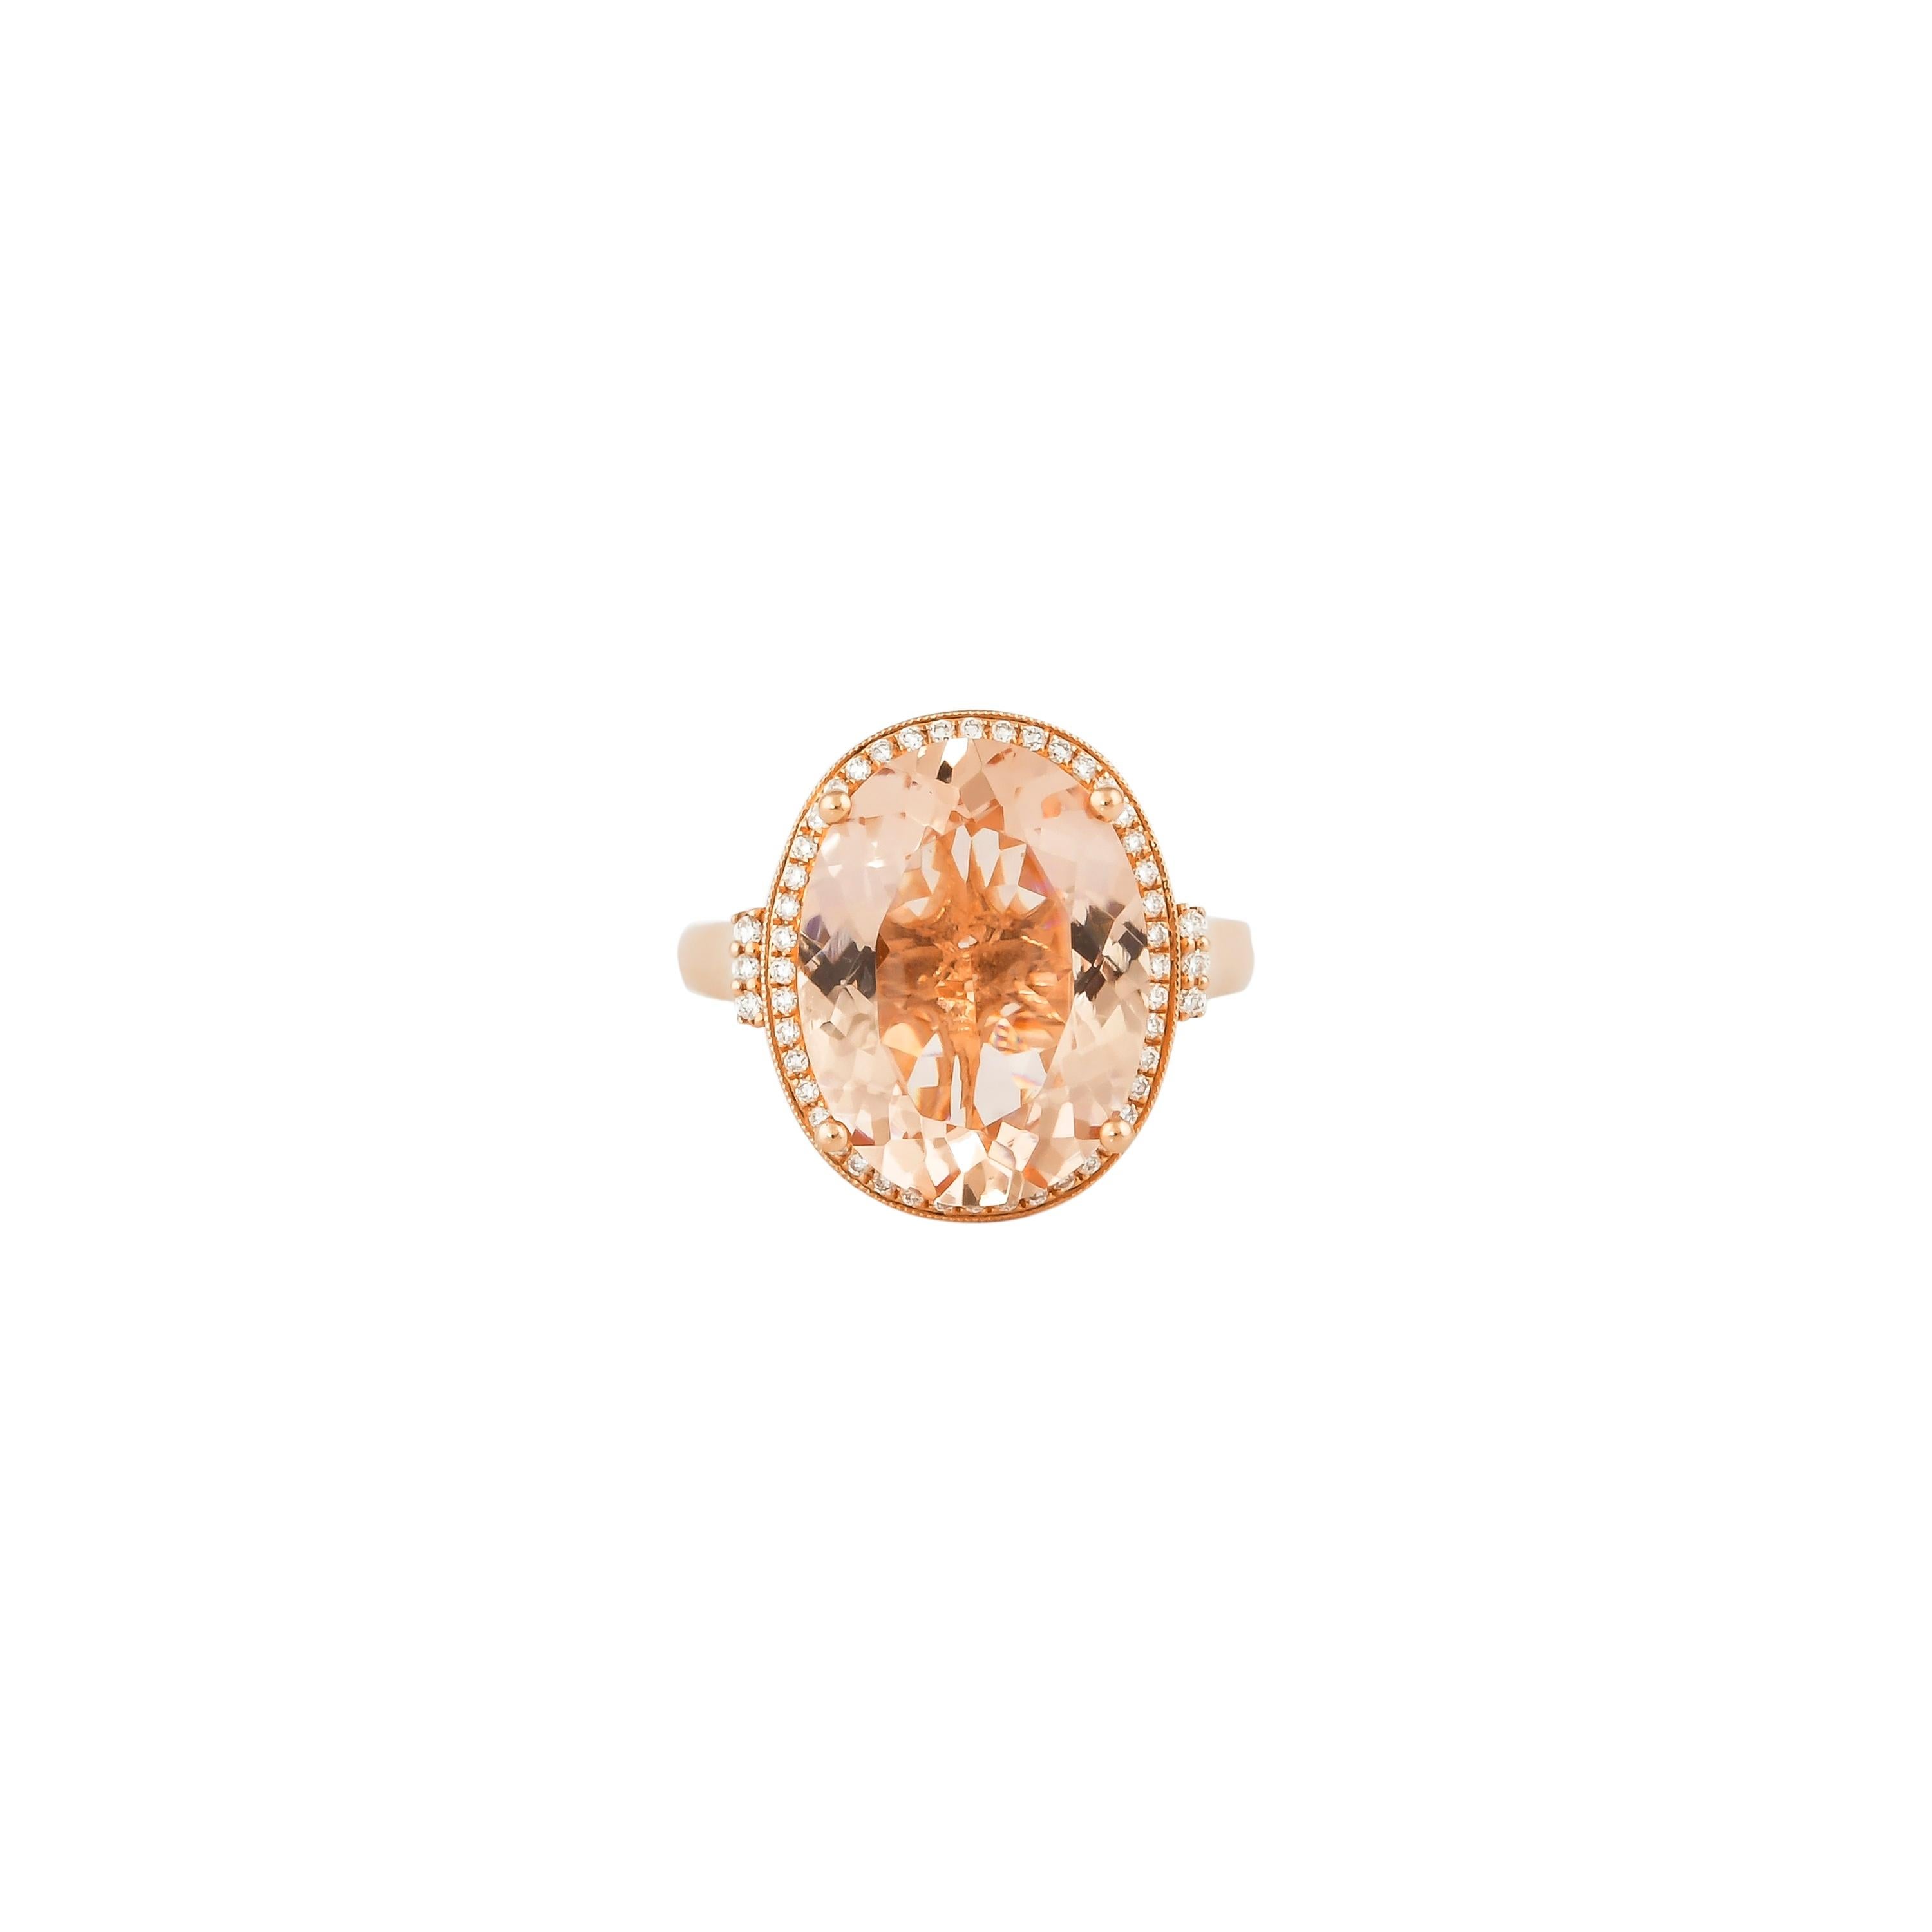 This collection features an array of magnificent morganites! Accented with diamonds these rings are made in rose gold and present a classic yet elegant look. 

Classic morganite ring in 18K rose gold with diamonds. 

Morganite: 7.77 carat oval